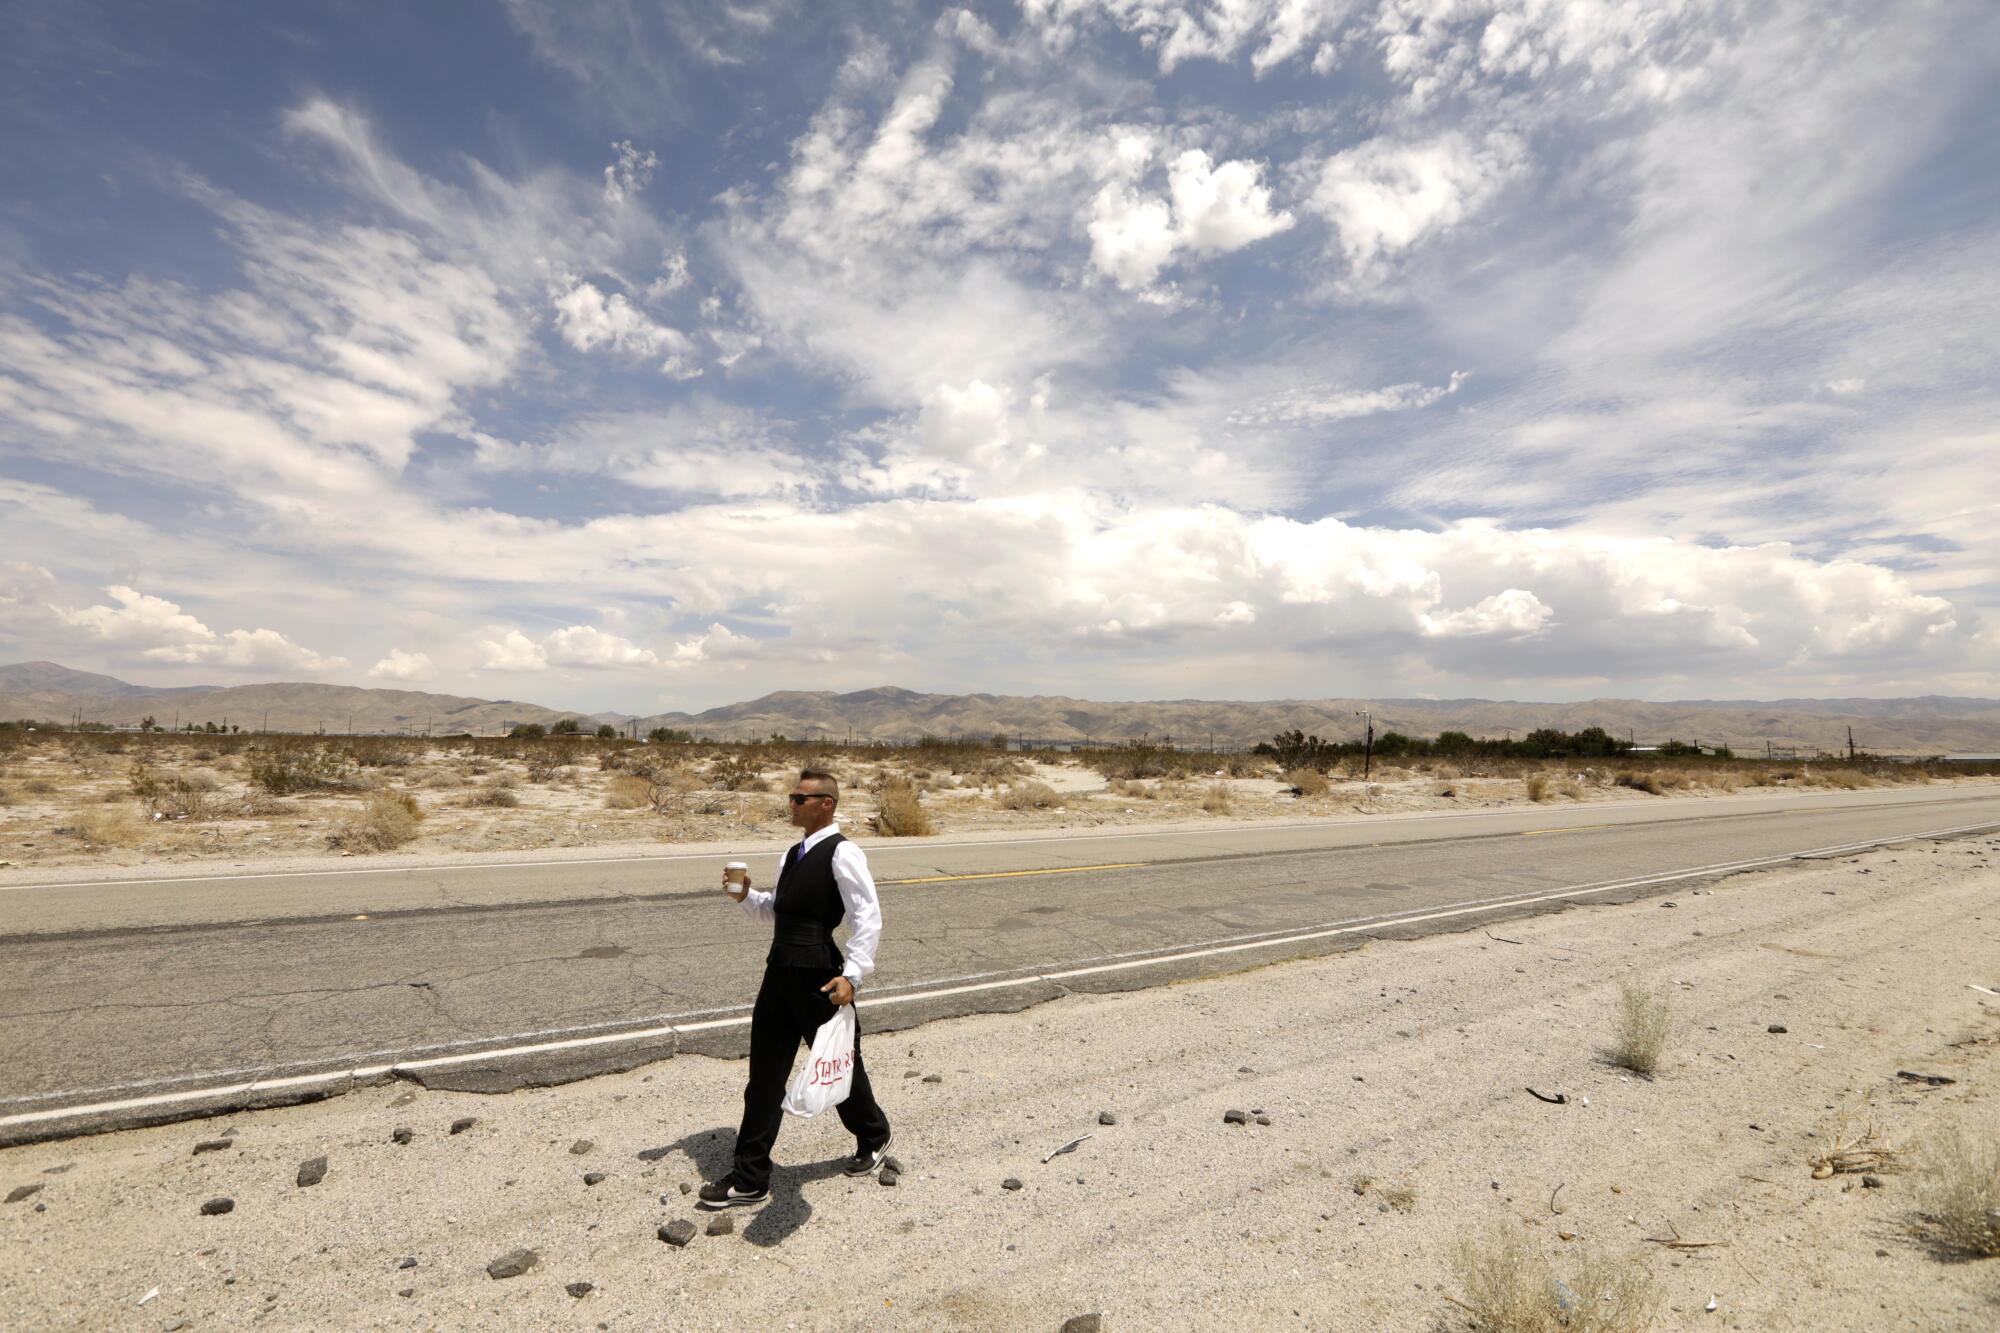 Roger Embrey, 40, walks to a job interview along a deserted portion of a road in Desert Hot Springs.